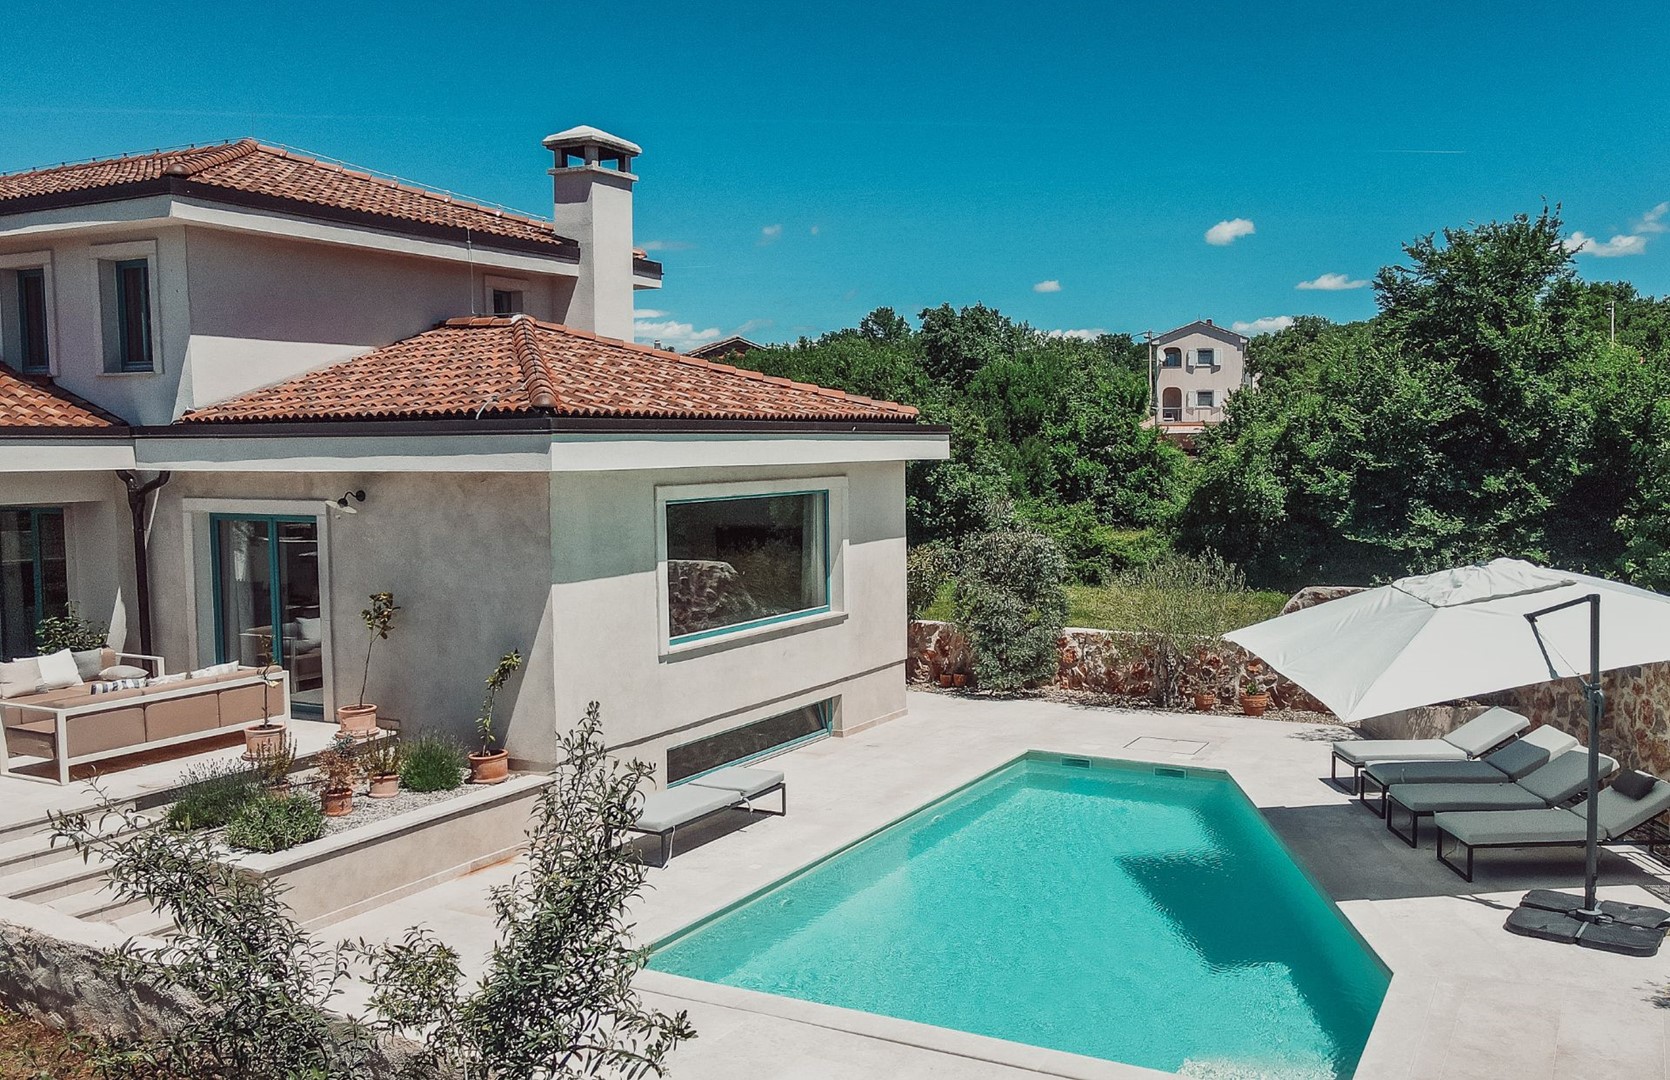 Charming Luxury Villa Solea with an outdoor Pool